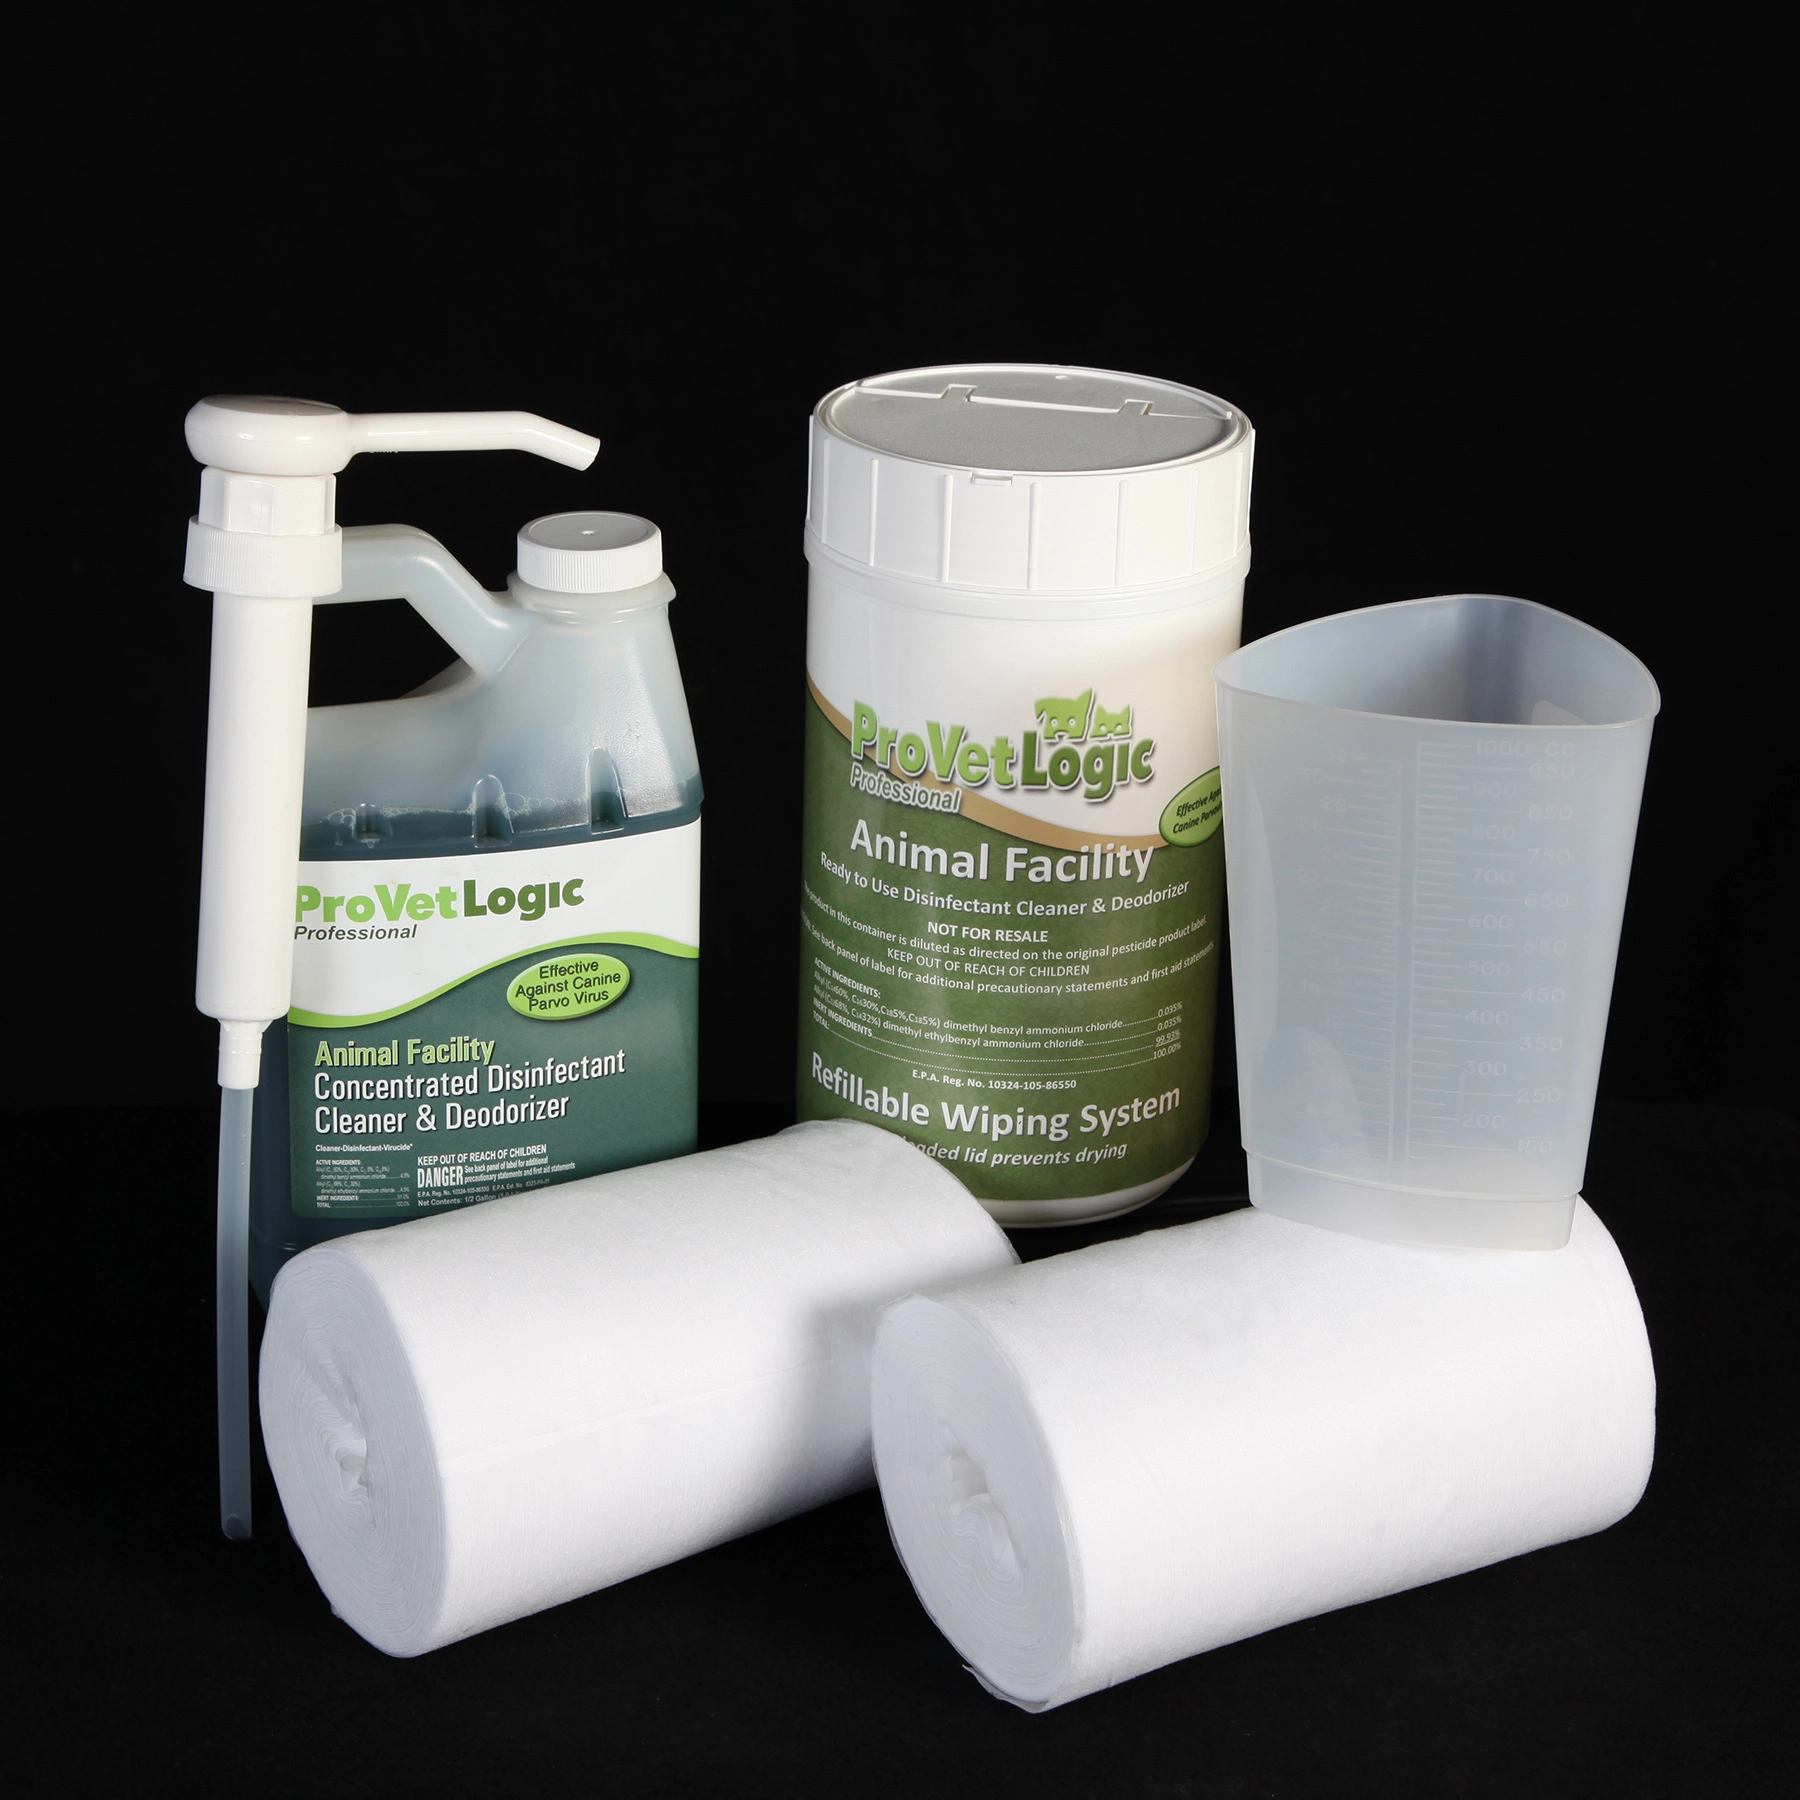 Animal Facility Disinfectant Refillable Wiping Starter Kit